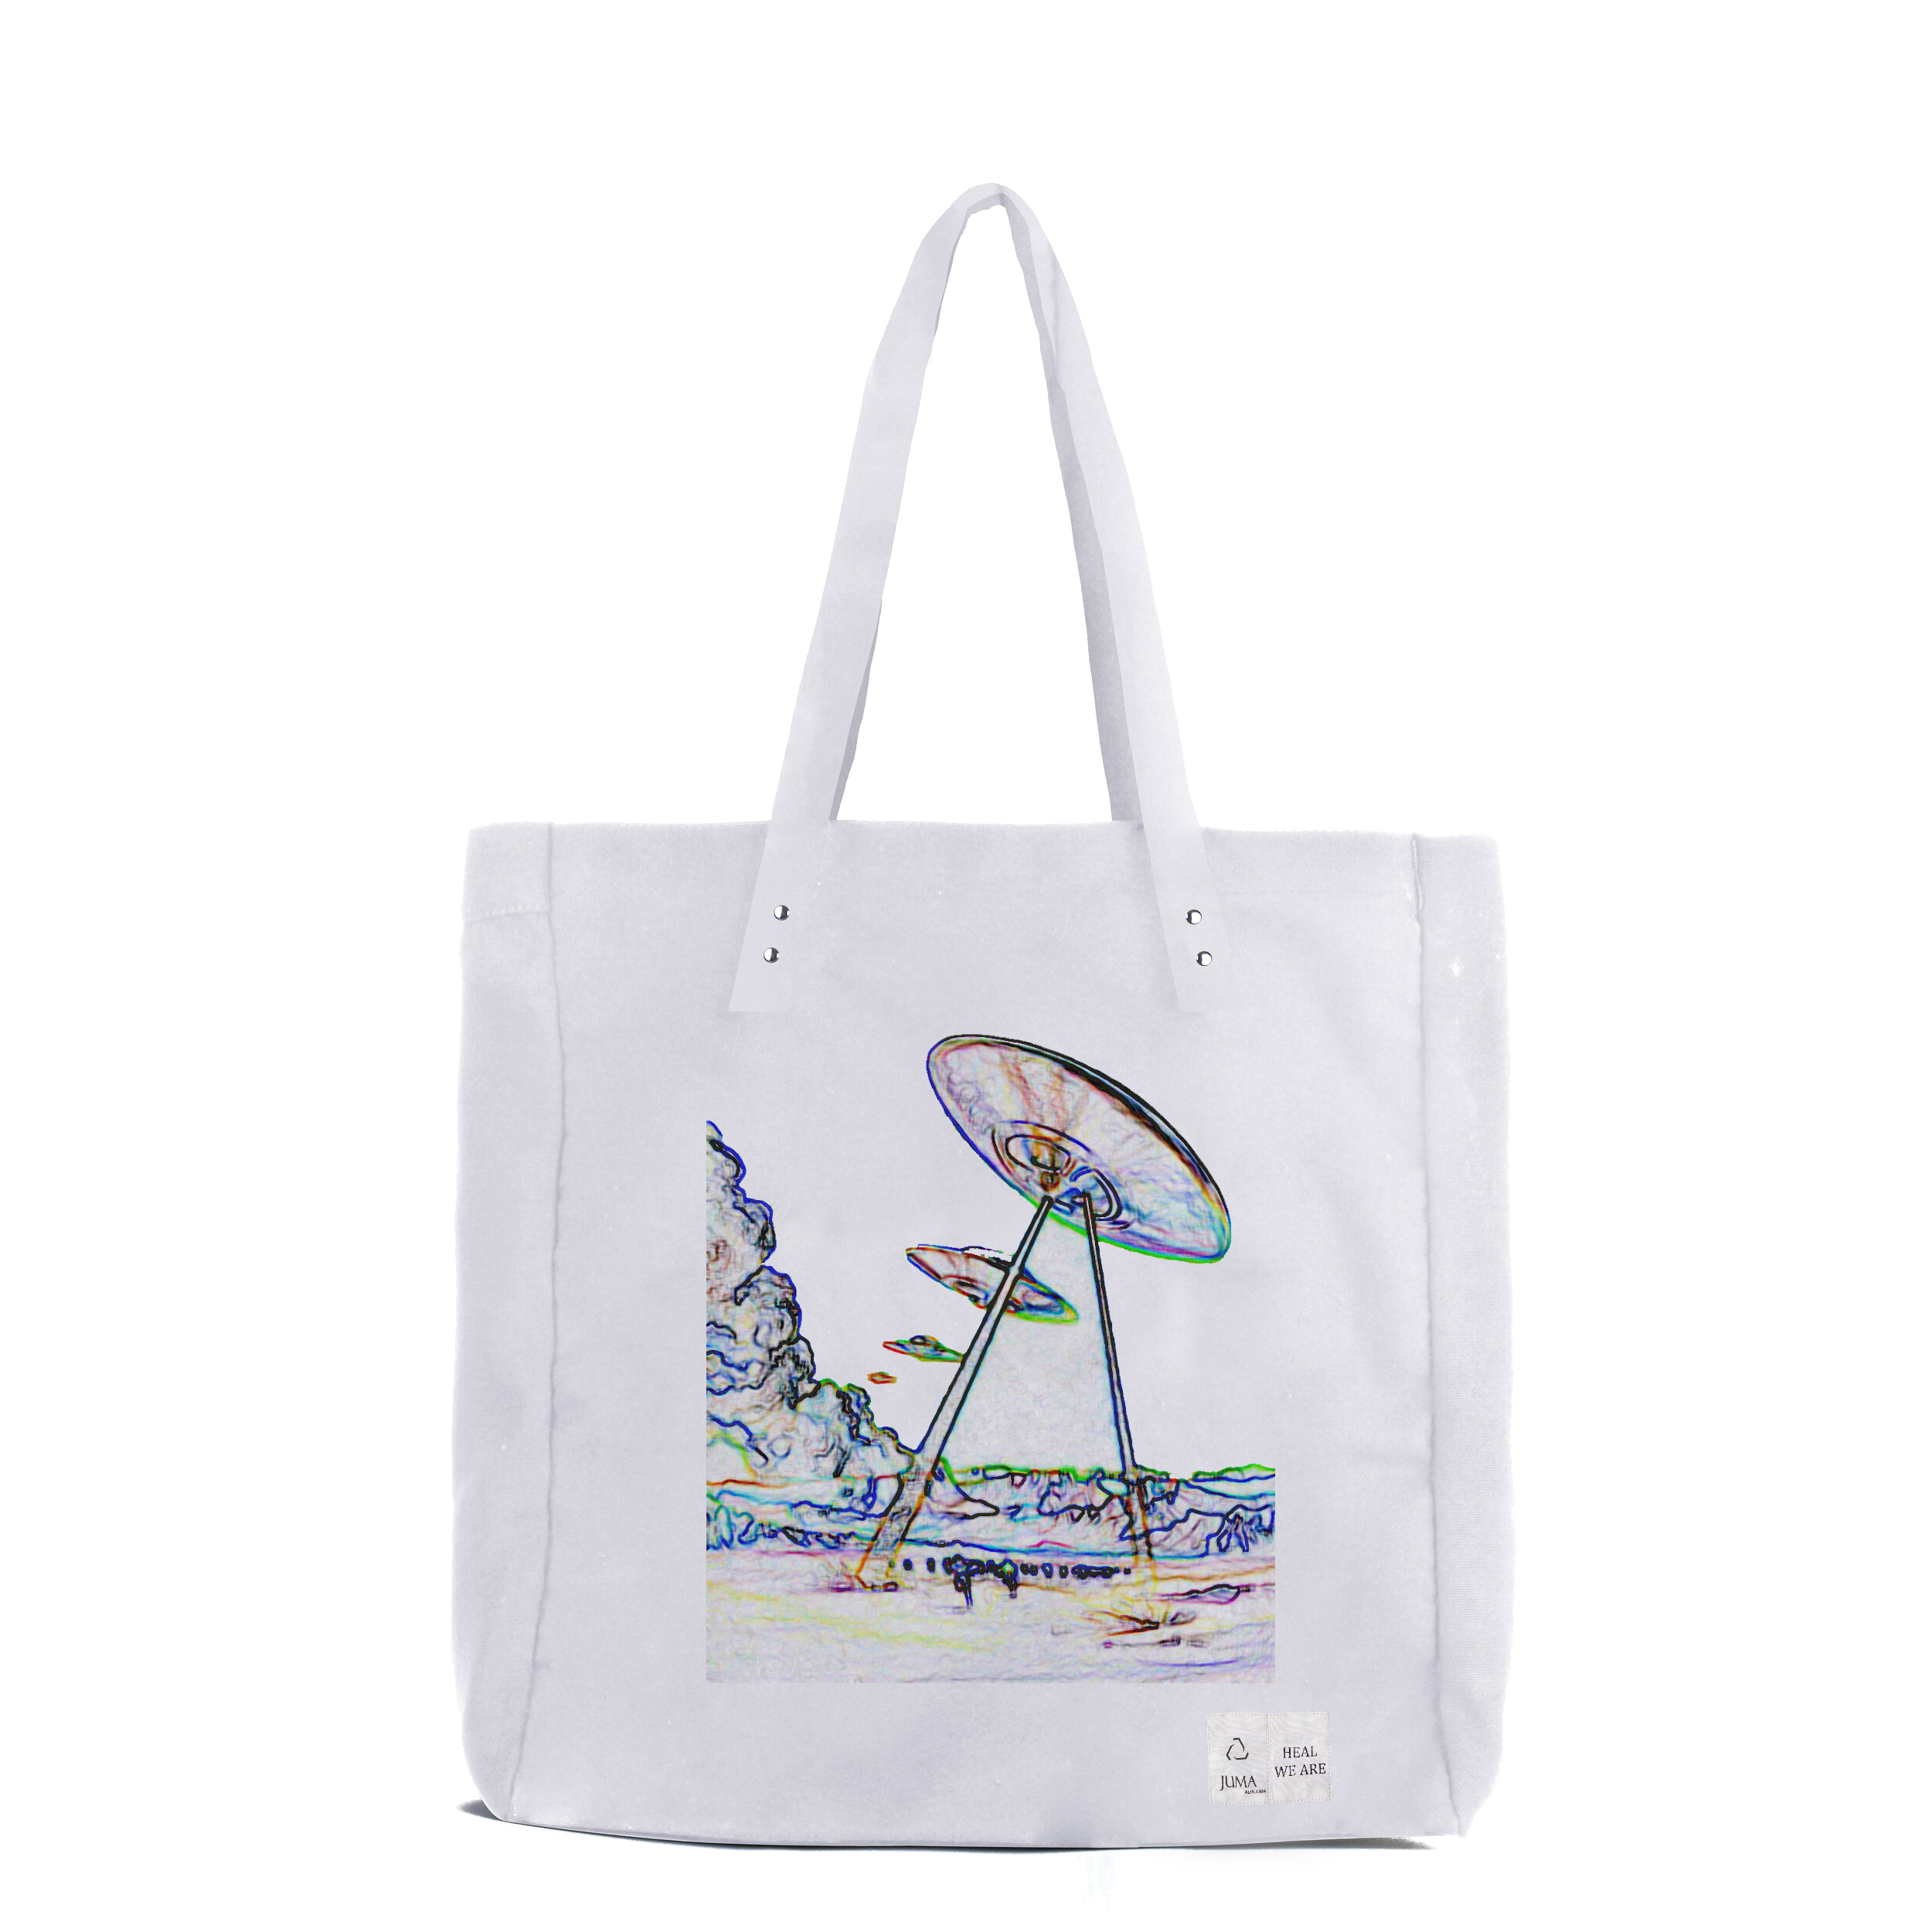 Heal We Are UFO 印花手提袋 - 3回收水瓶 - 白色｜Heal We Are UFO Print Tote Bag - 3 Recycled Water Bottles - White